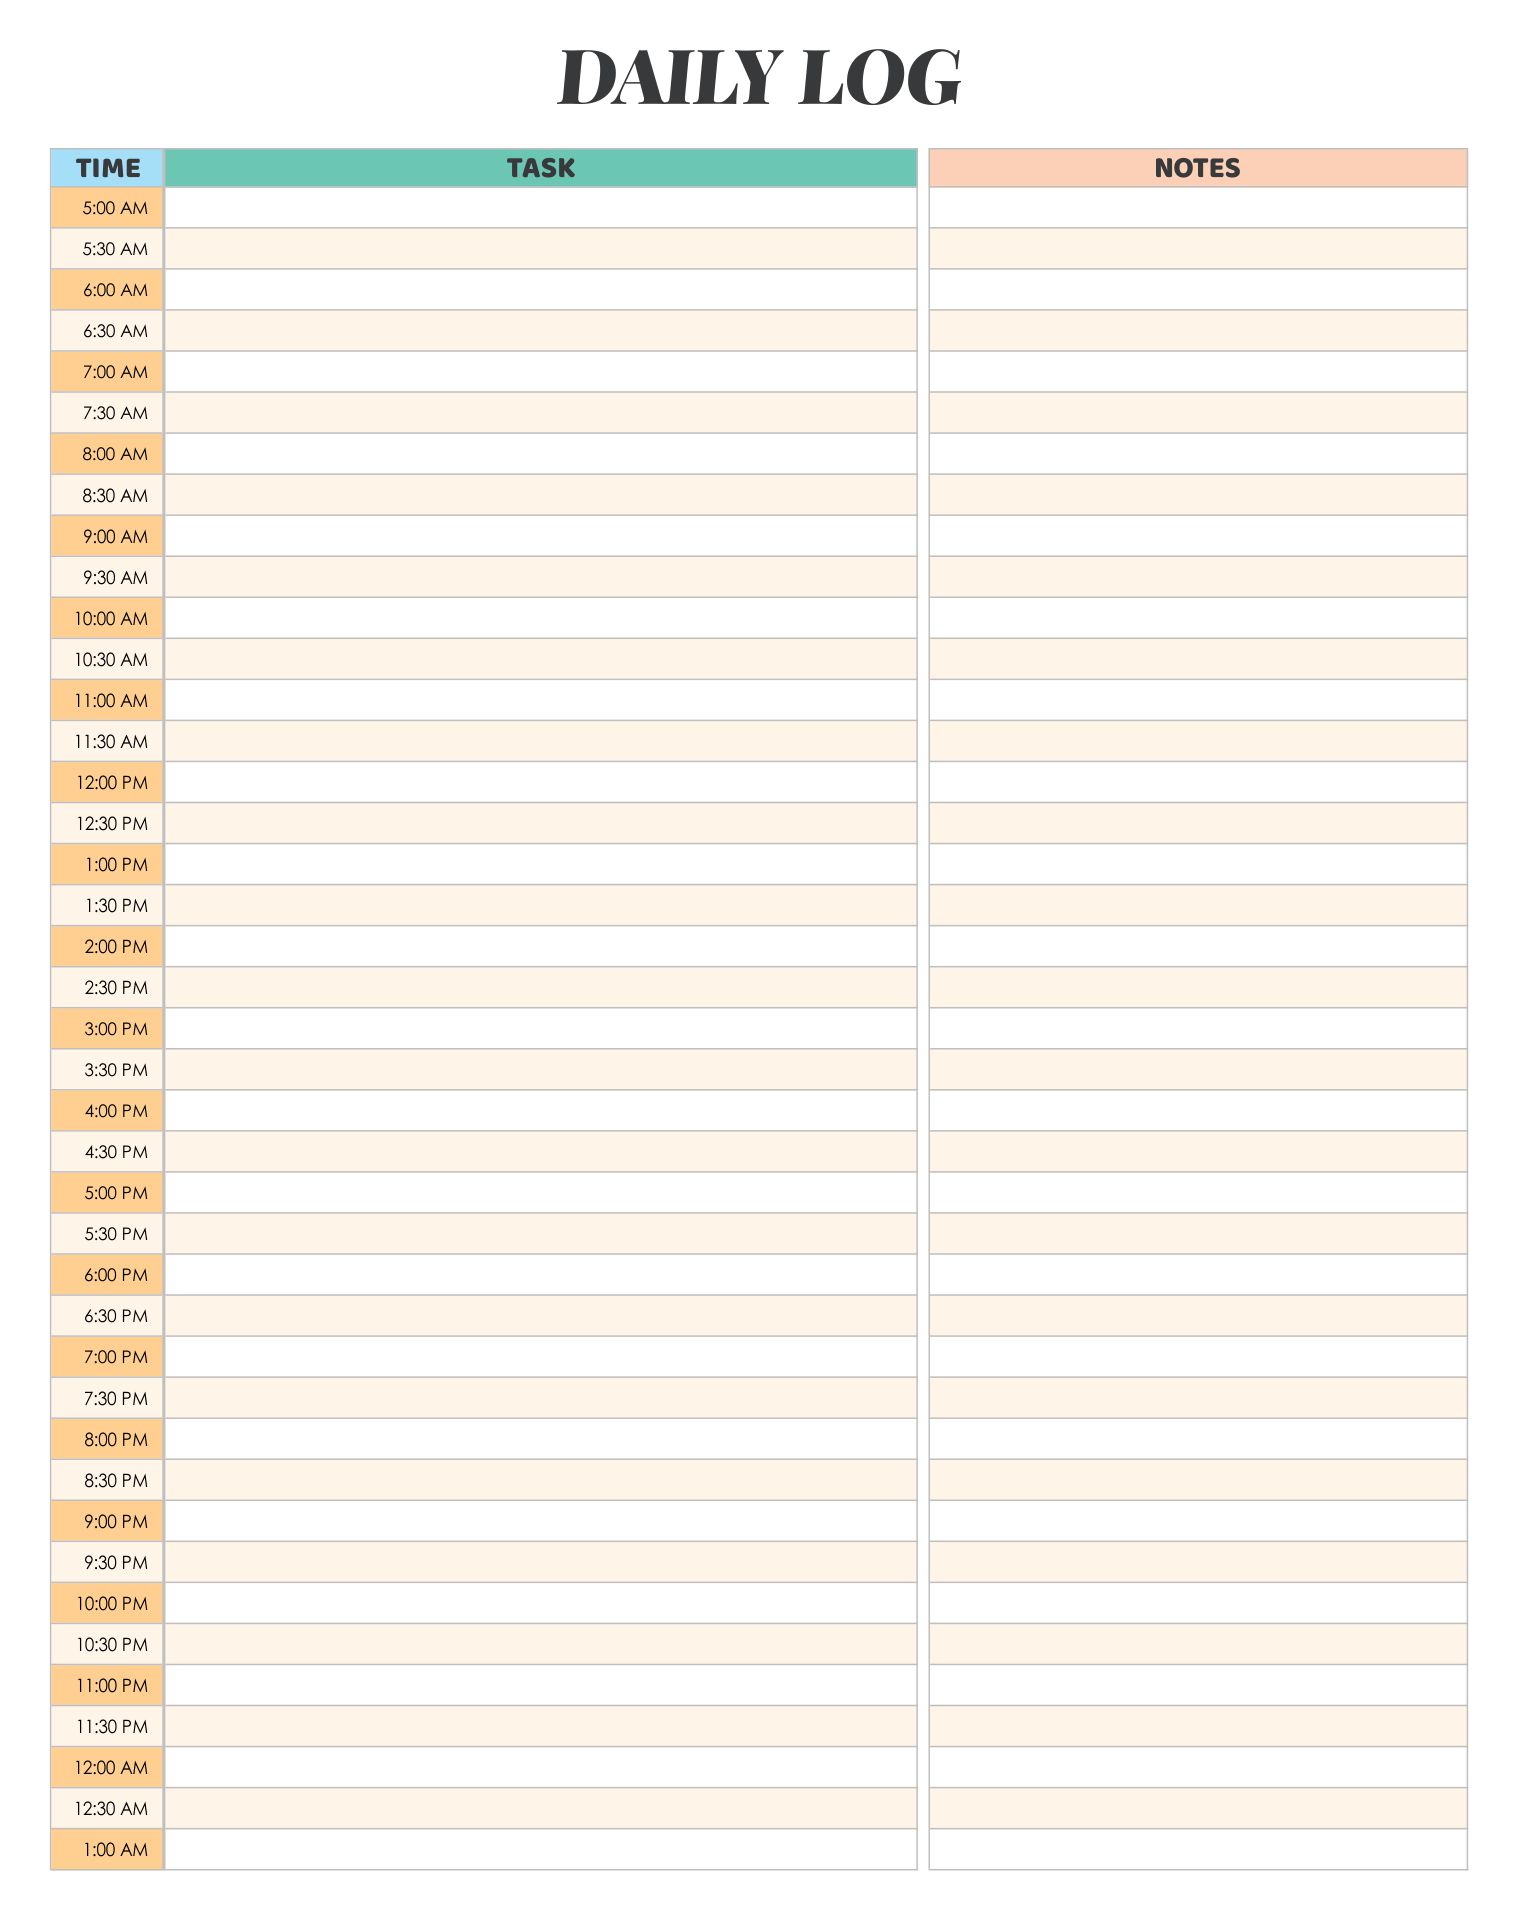 7-best-images-of-printable-daily-log-sheets-templates-daily-work-log